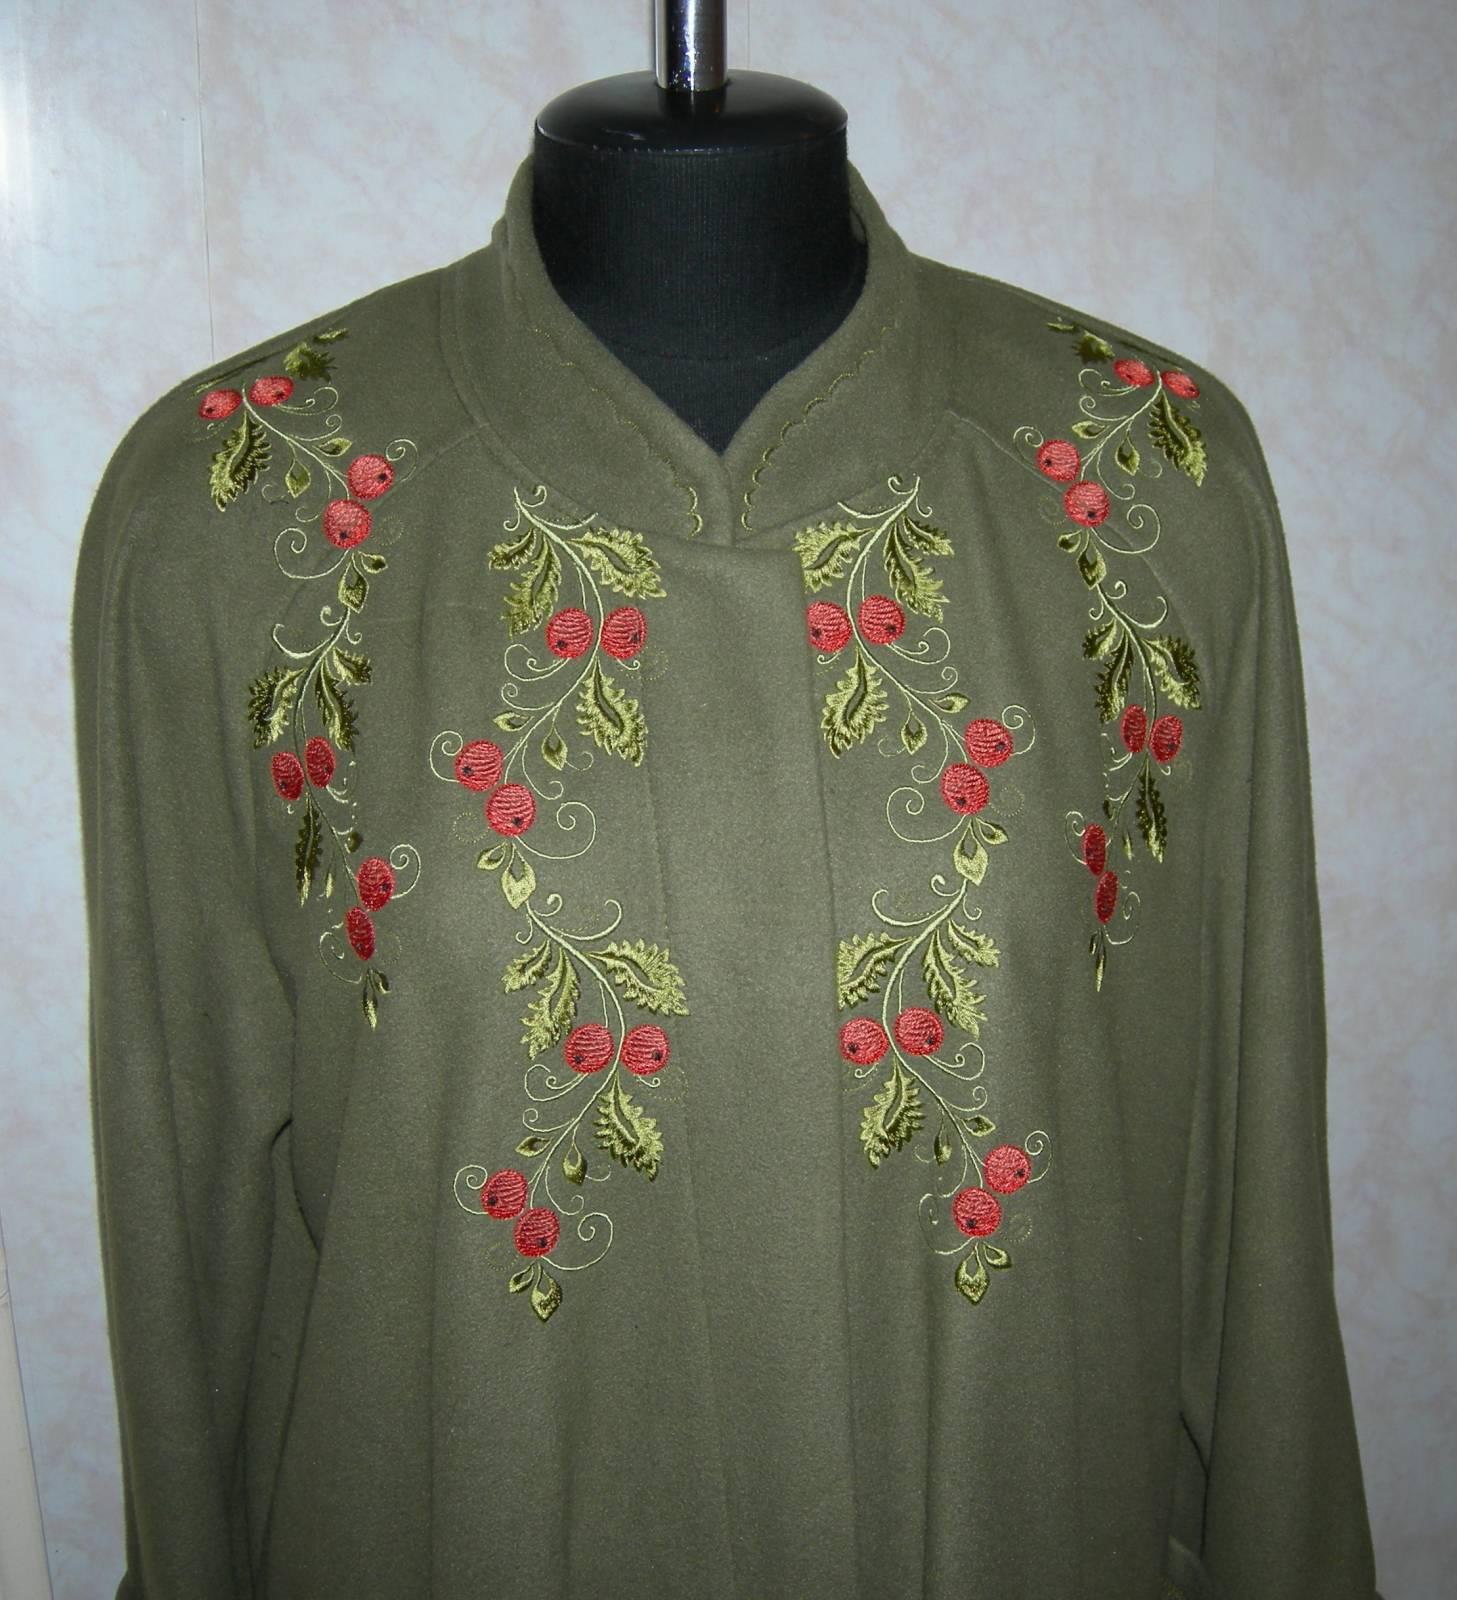 Embroidered shirt Showcase with free embroidery designs Machine